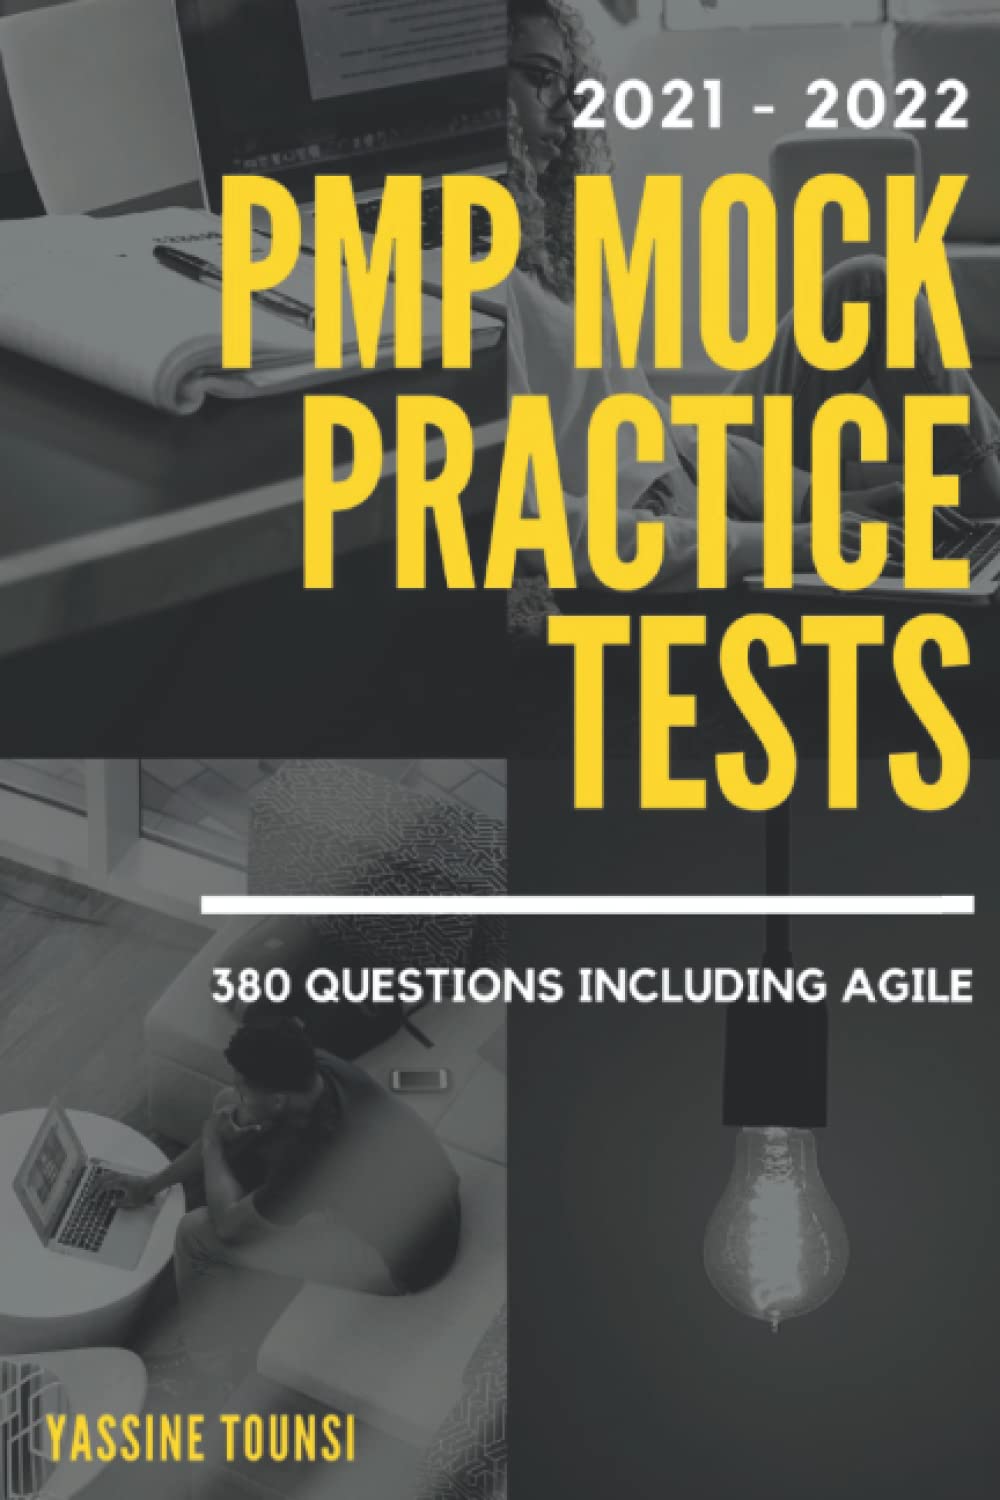 PMP Mock Practice Tests 2021-2022 : 380 questions including Agile